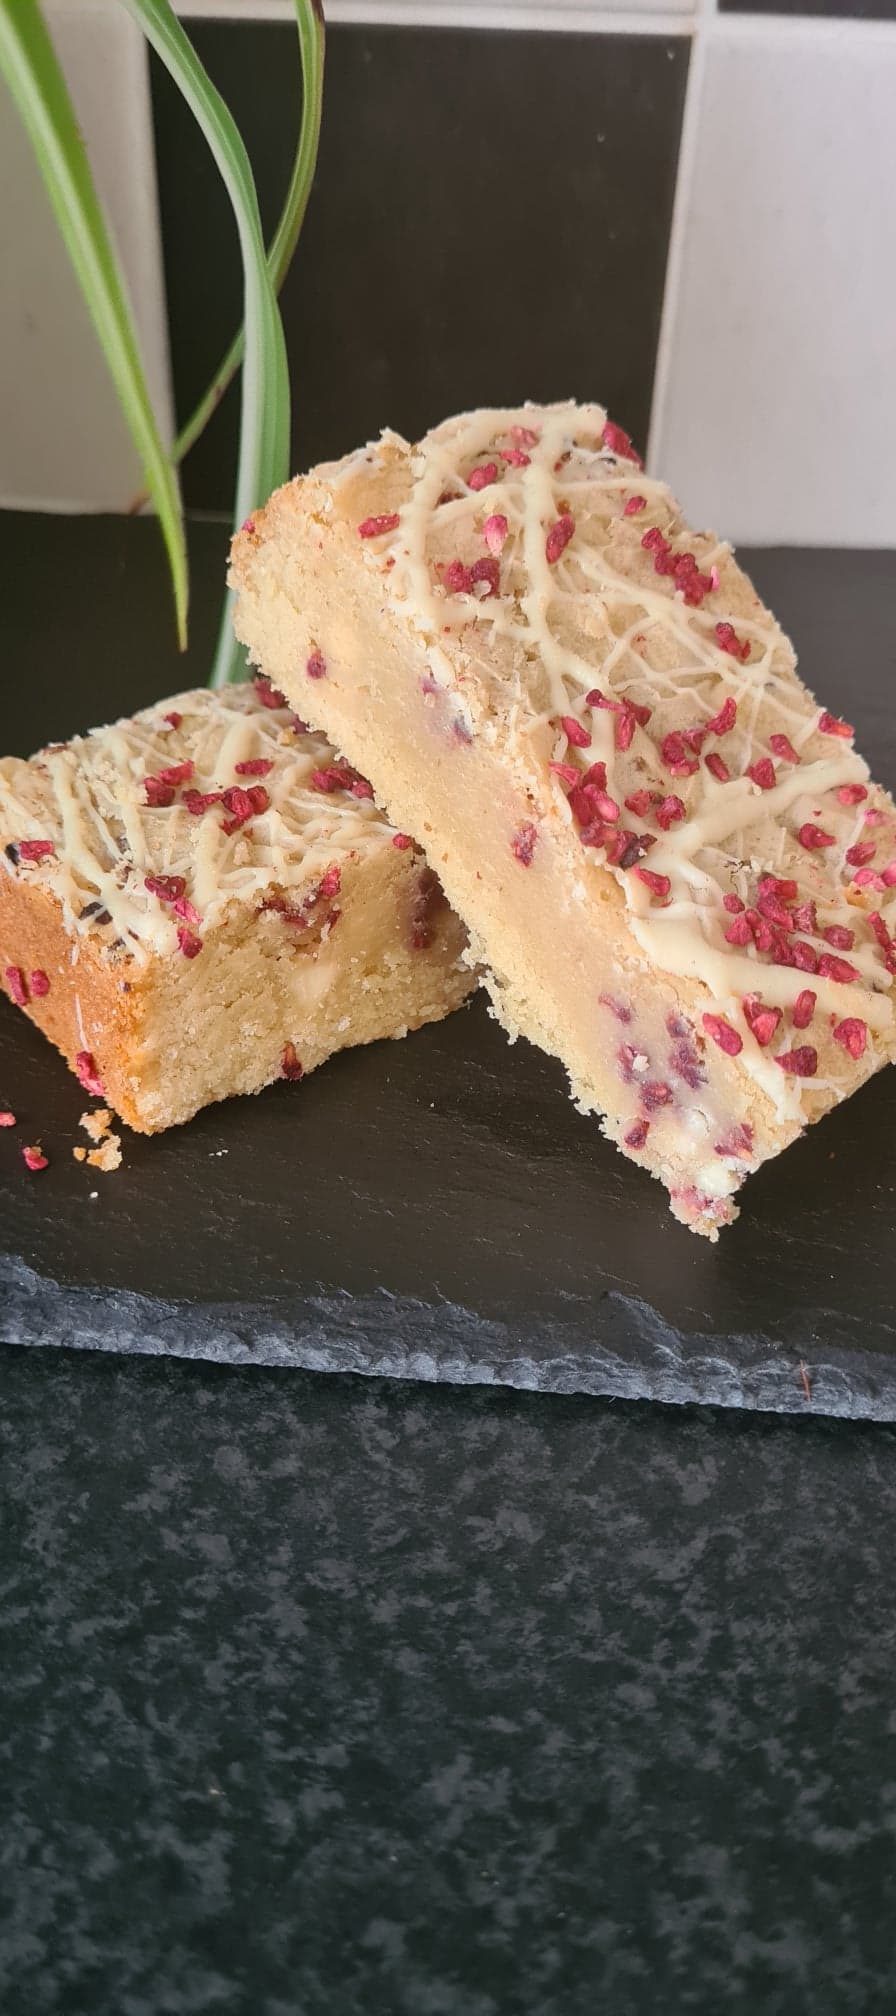 Our white chocolate raspberry ripple blondie. Topped with some raspberry flakes